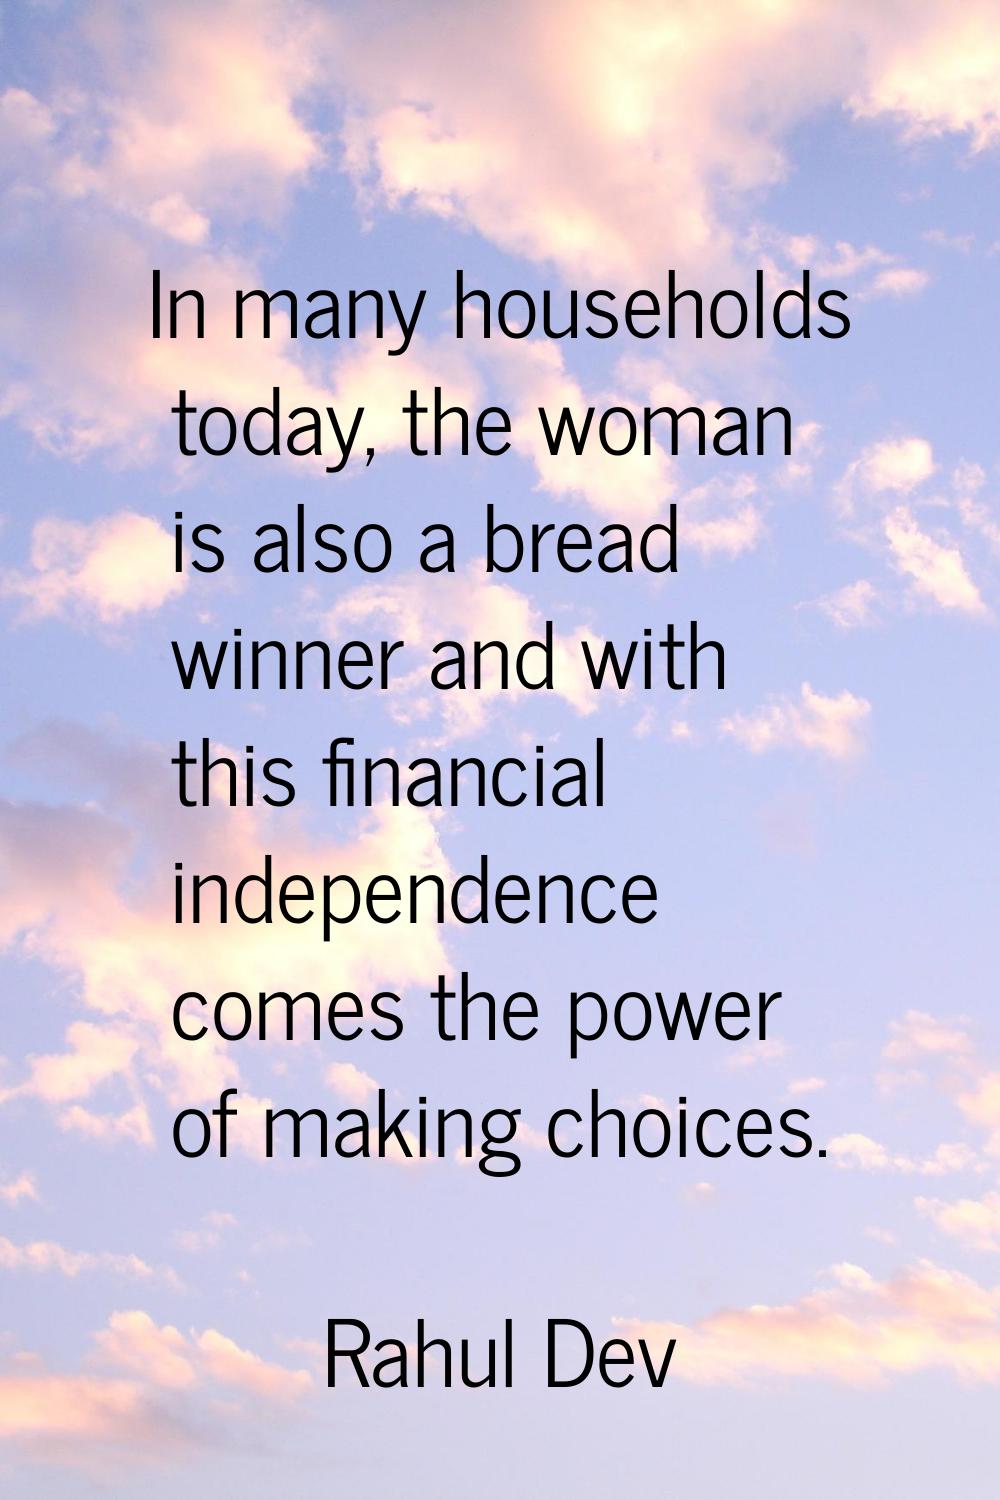 In many households today, the woman is also a bread winner and with this financial independence com